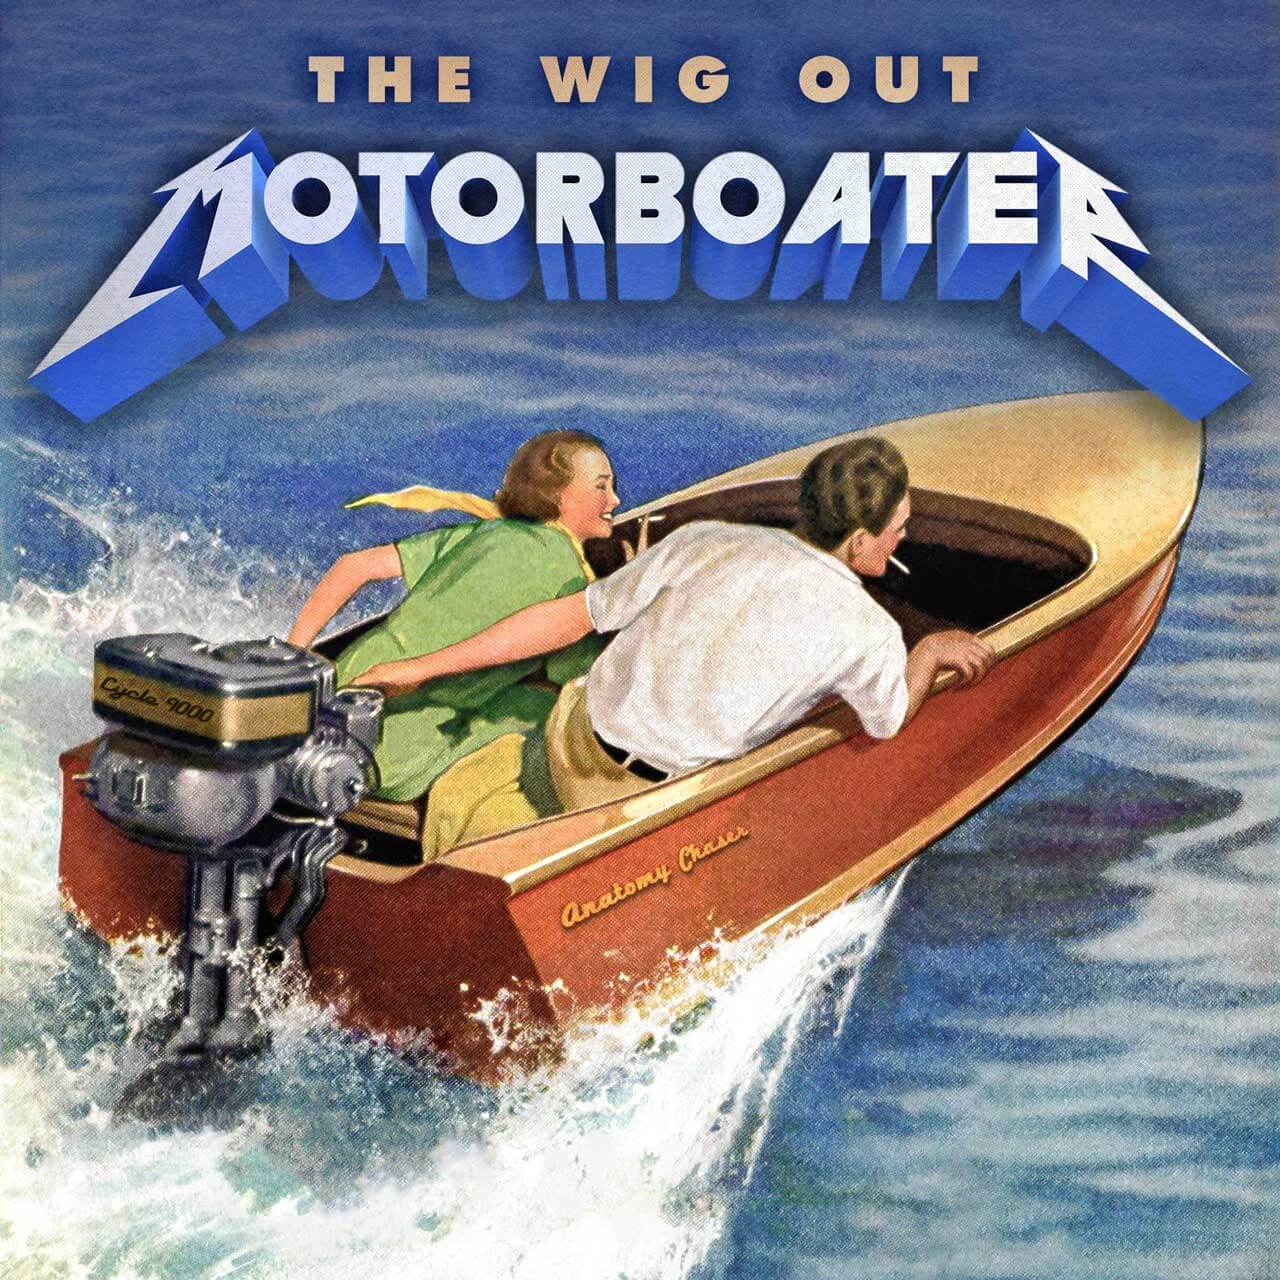 The Wig Out - Motorboater single cover artwork